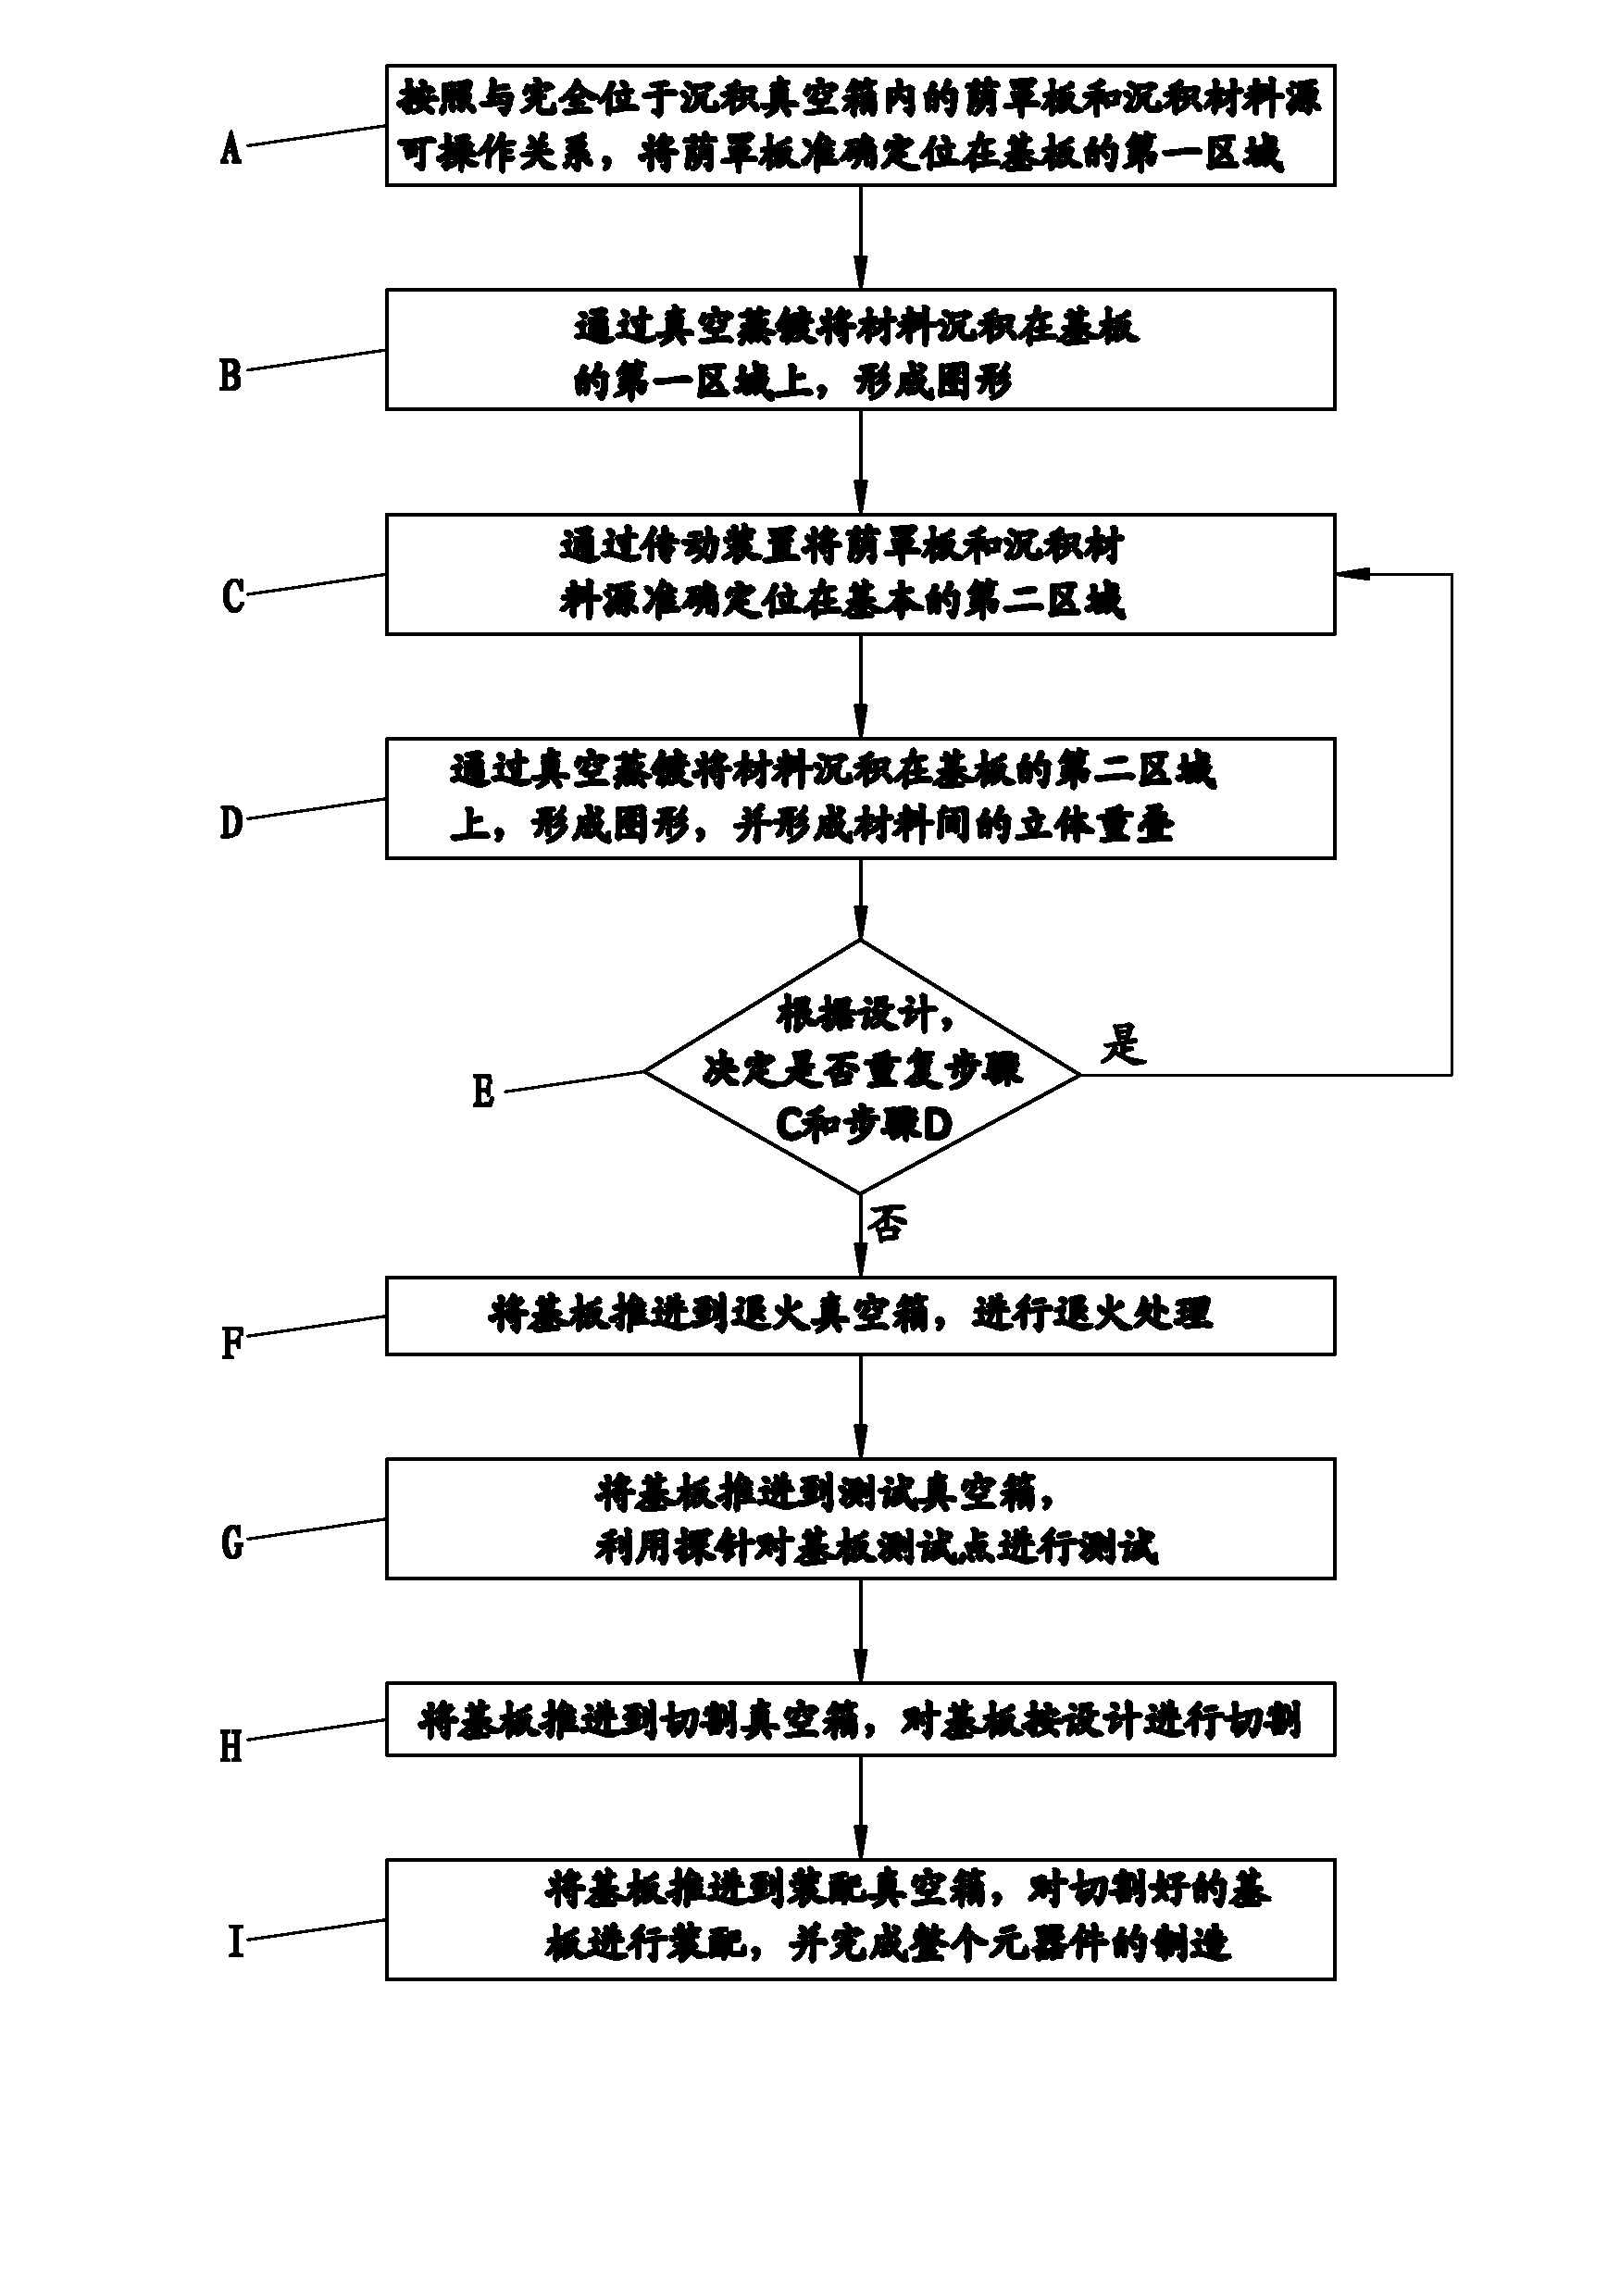 Method and system for manufacturing component by using shadow mask technological line